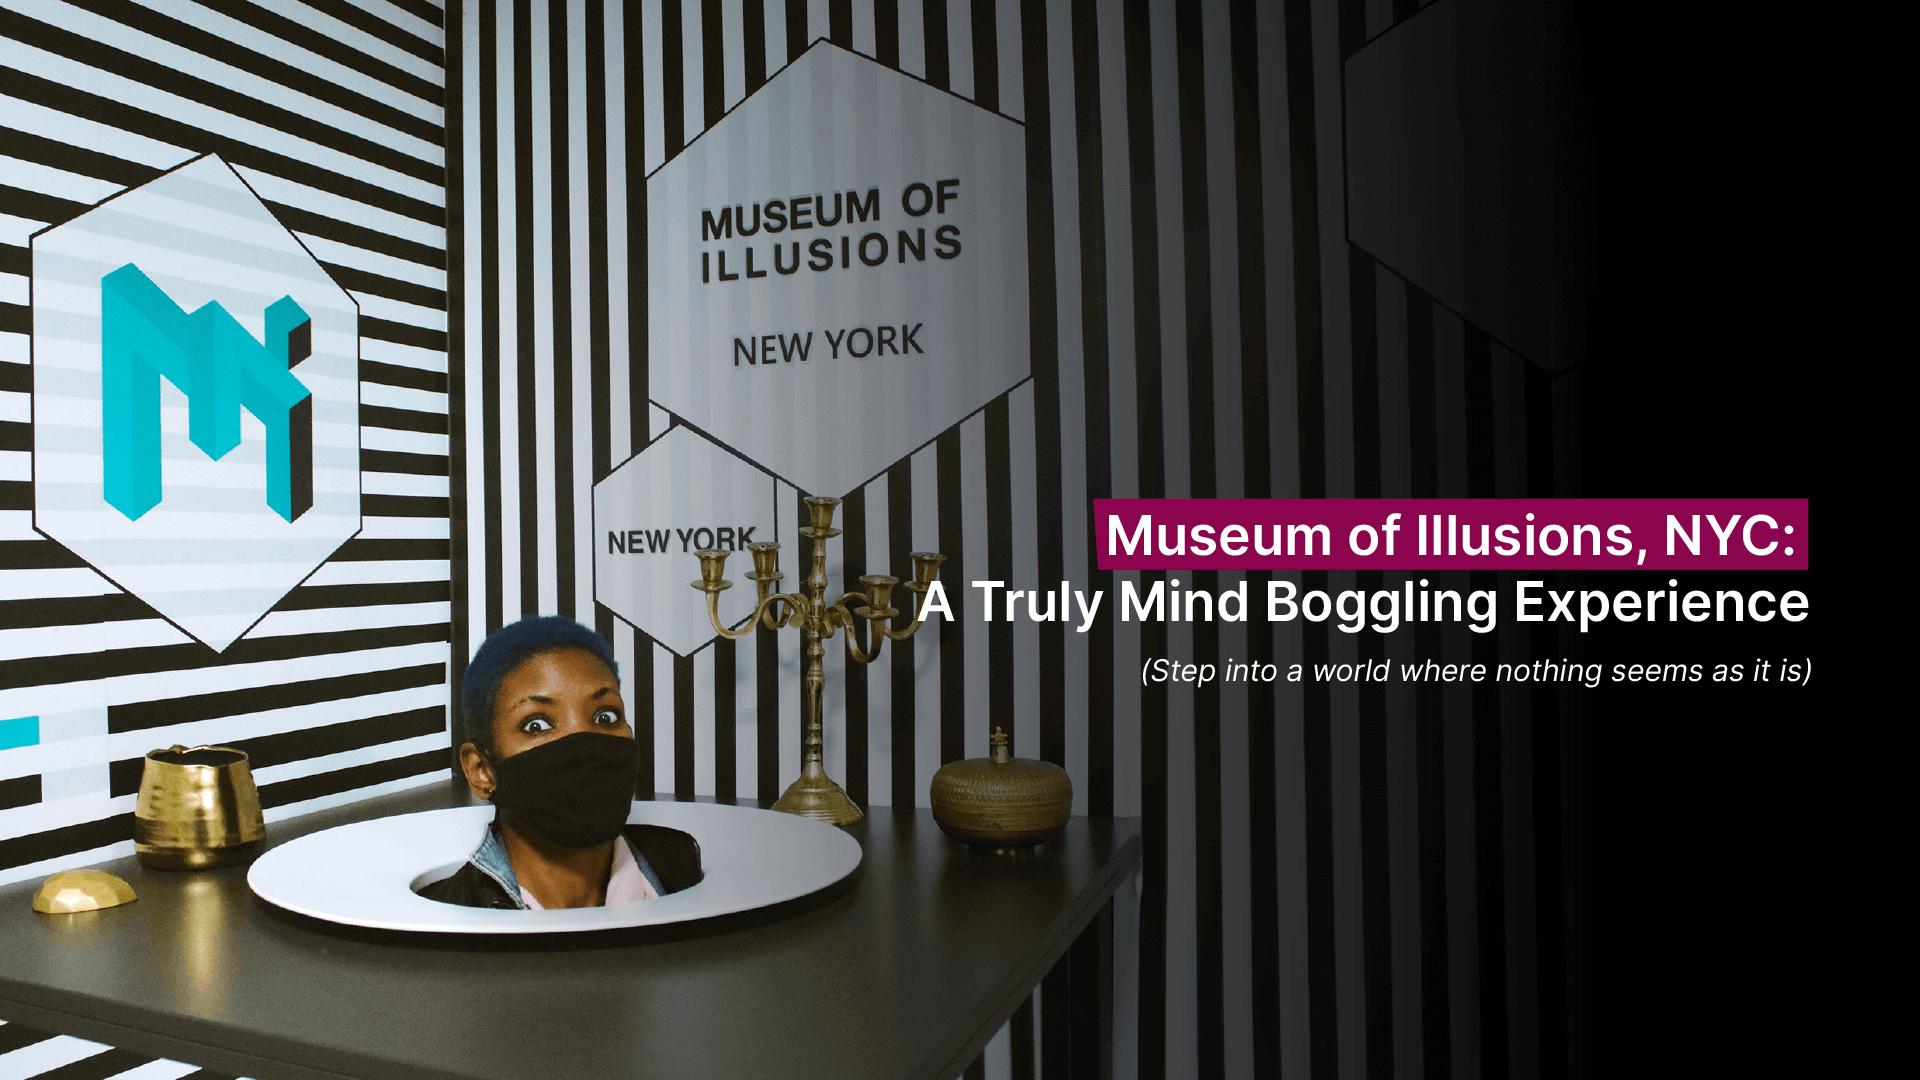 Museum of Illusions, NYC; A Truly Mind Boggling Experience